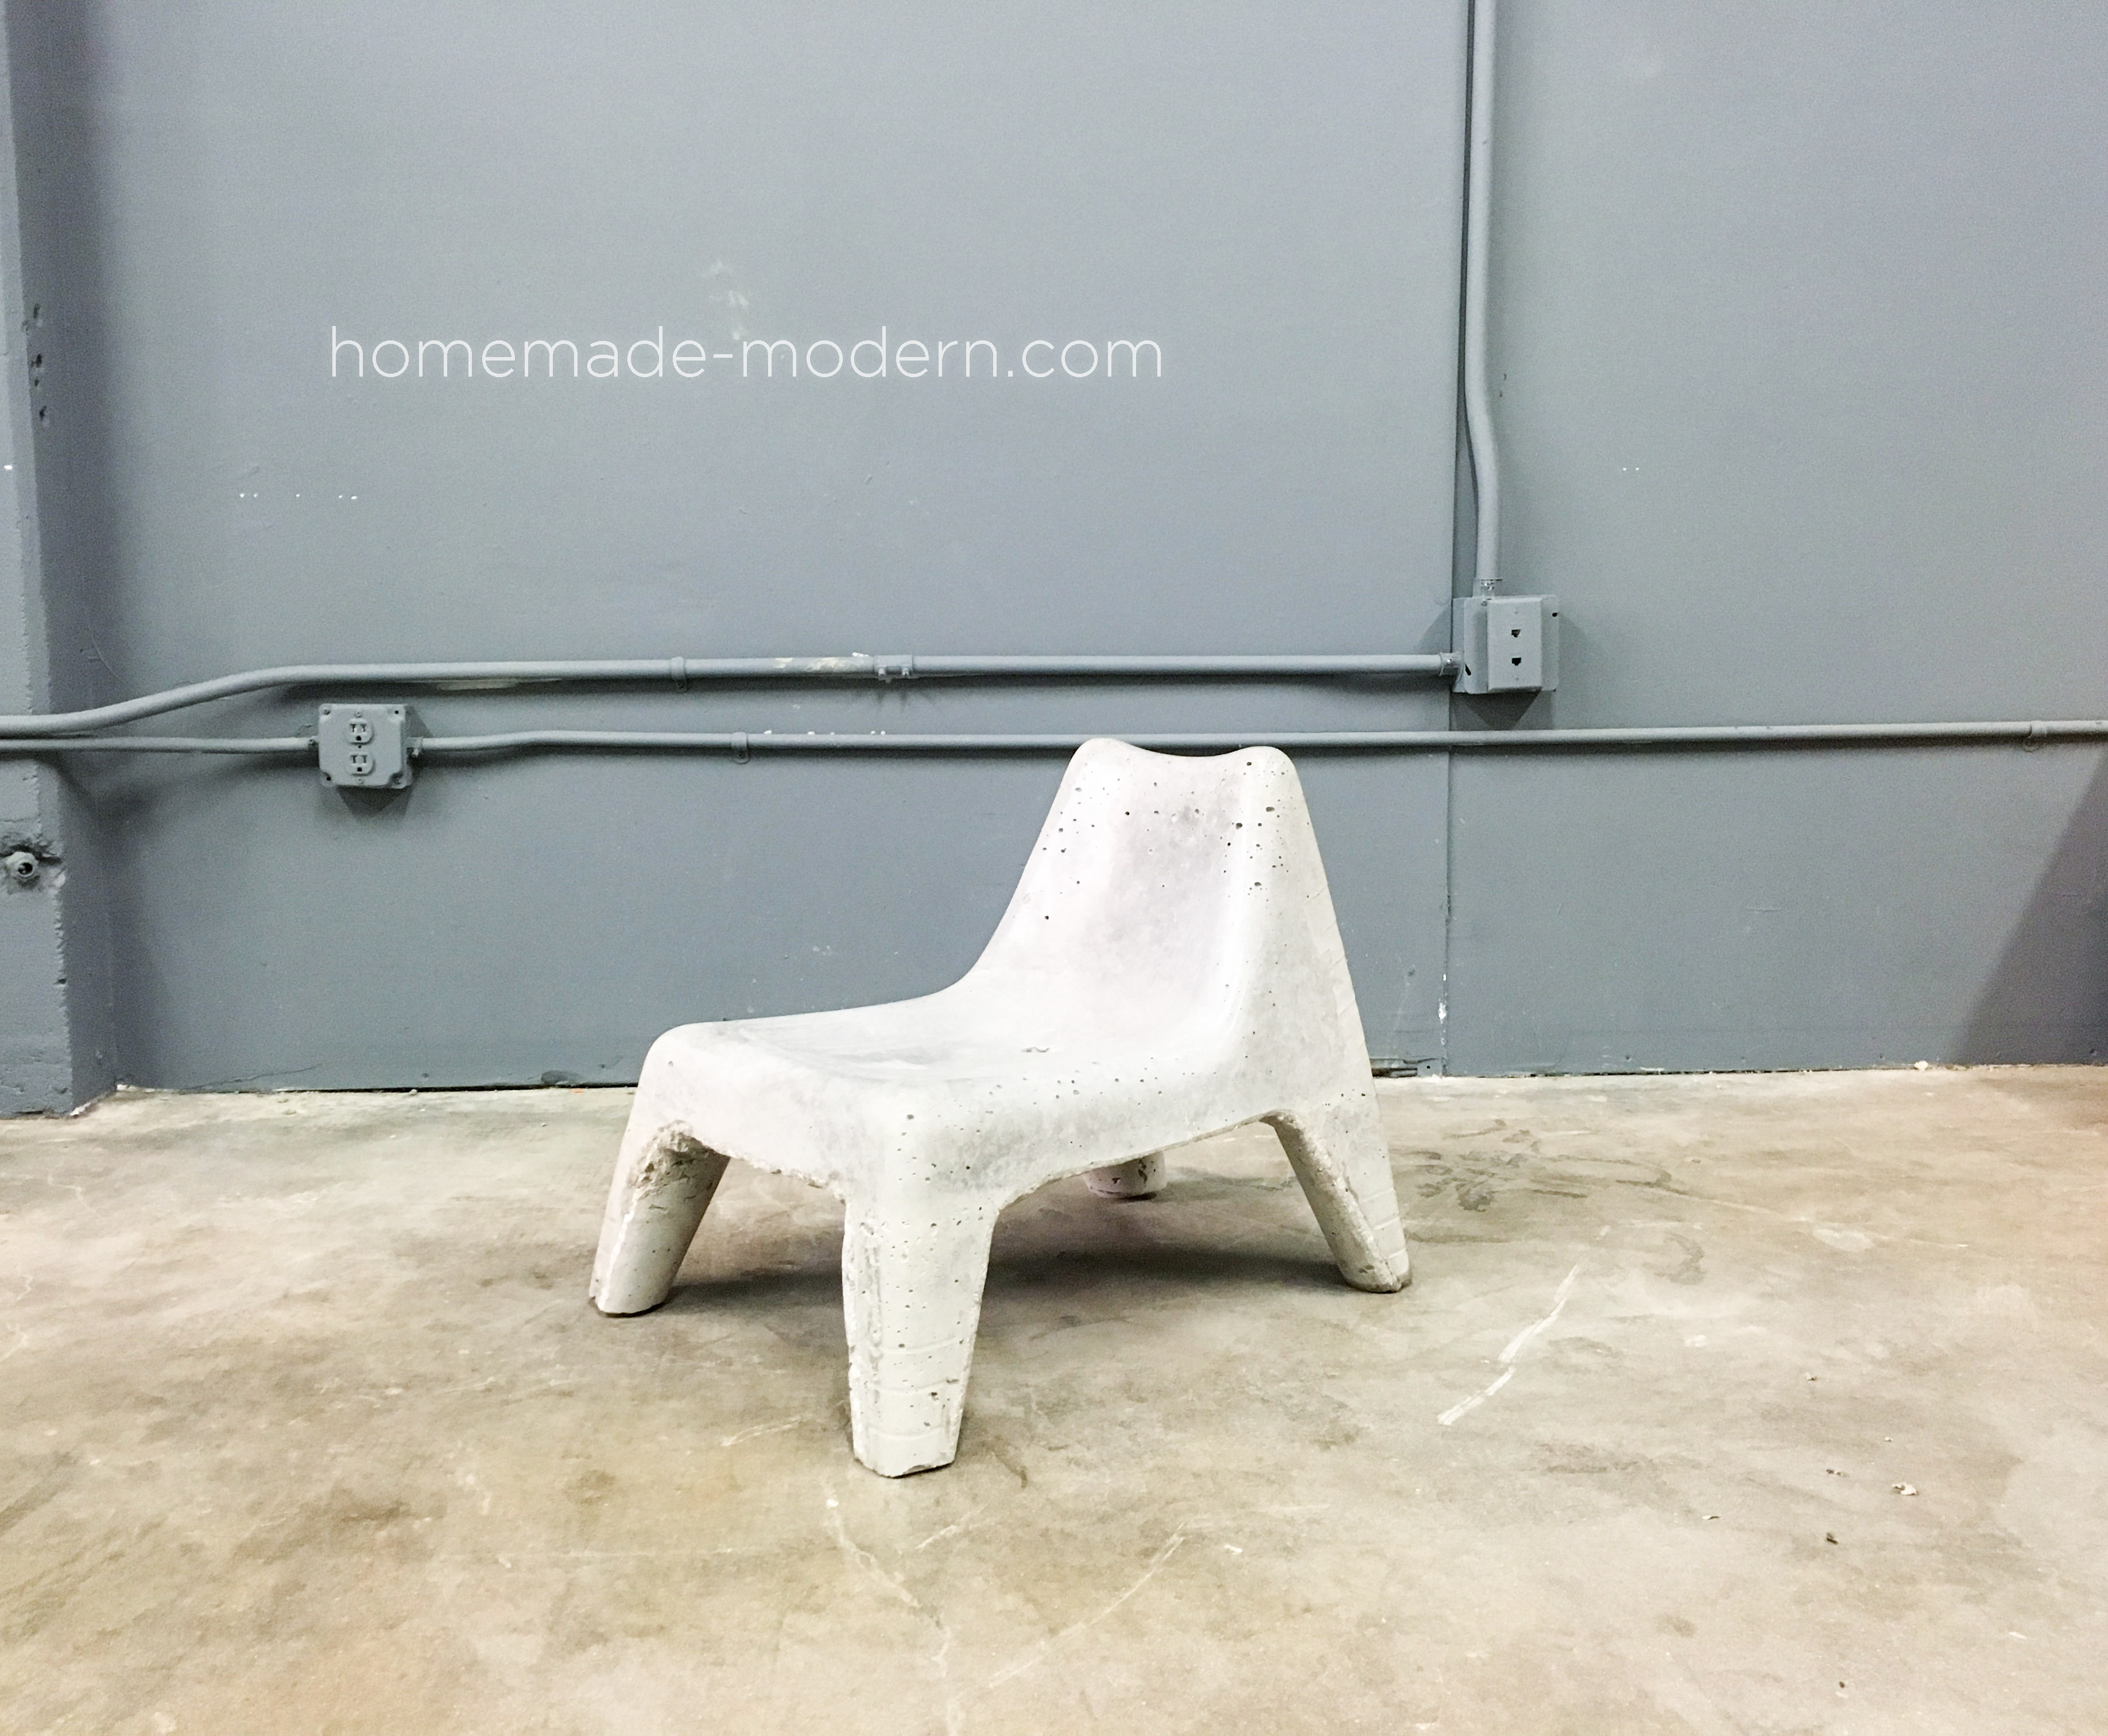 This DIY Concrete Chair was cast in a plastic chair from IKEA. For more information go to HomeMade-Modern.com